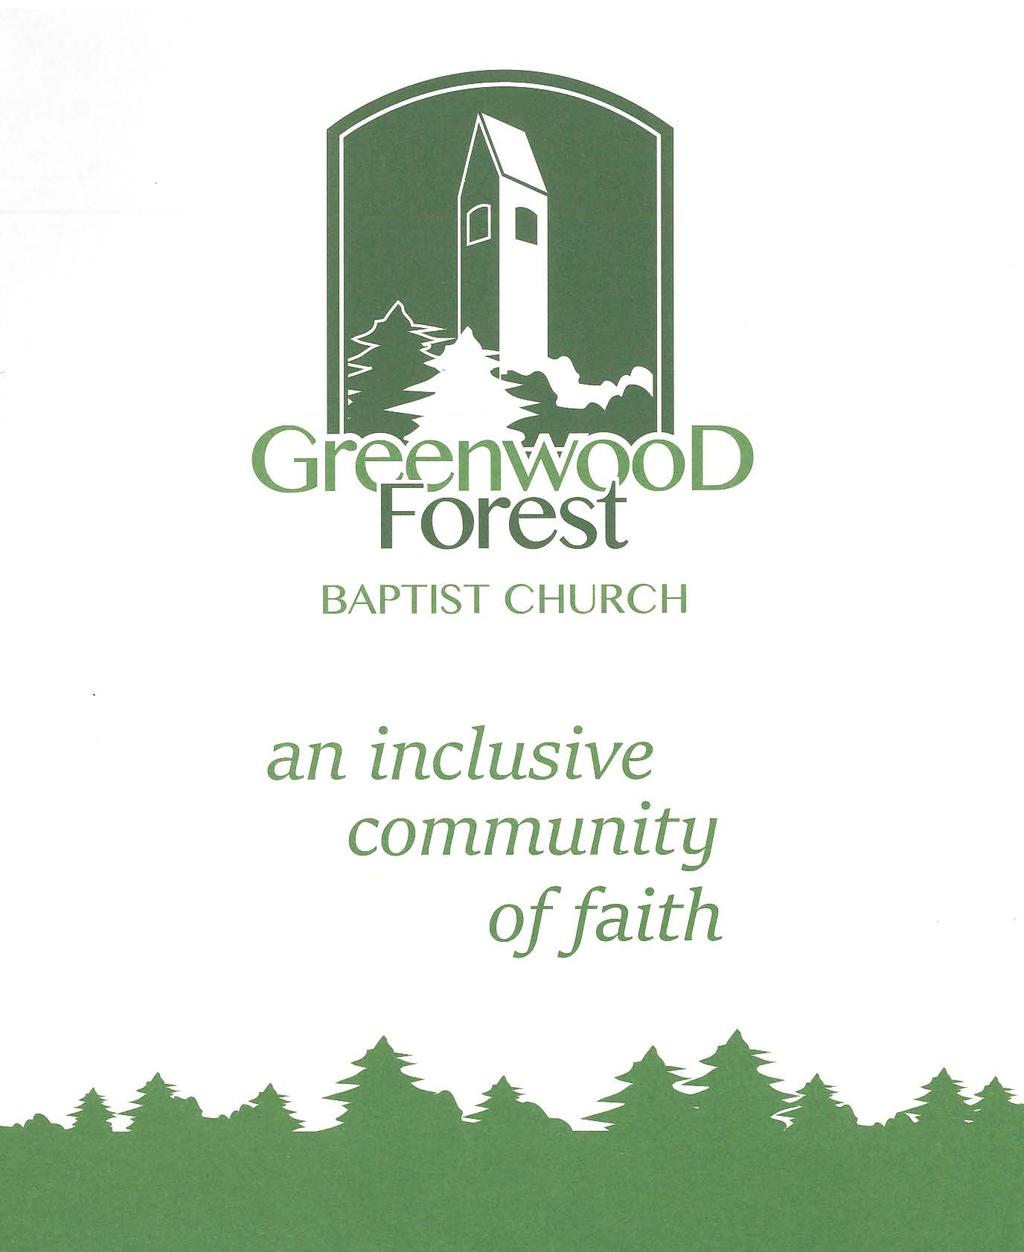 Greenwood Forest Baptist Church Reign of Christ Hanging of the Green The Hanging of the Green In Isaiah 60:13 we find these words: "The Glory of Lebanon shall come unto you, the fir tree, the pine